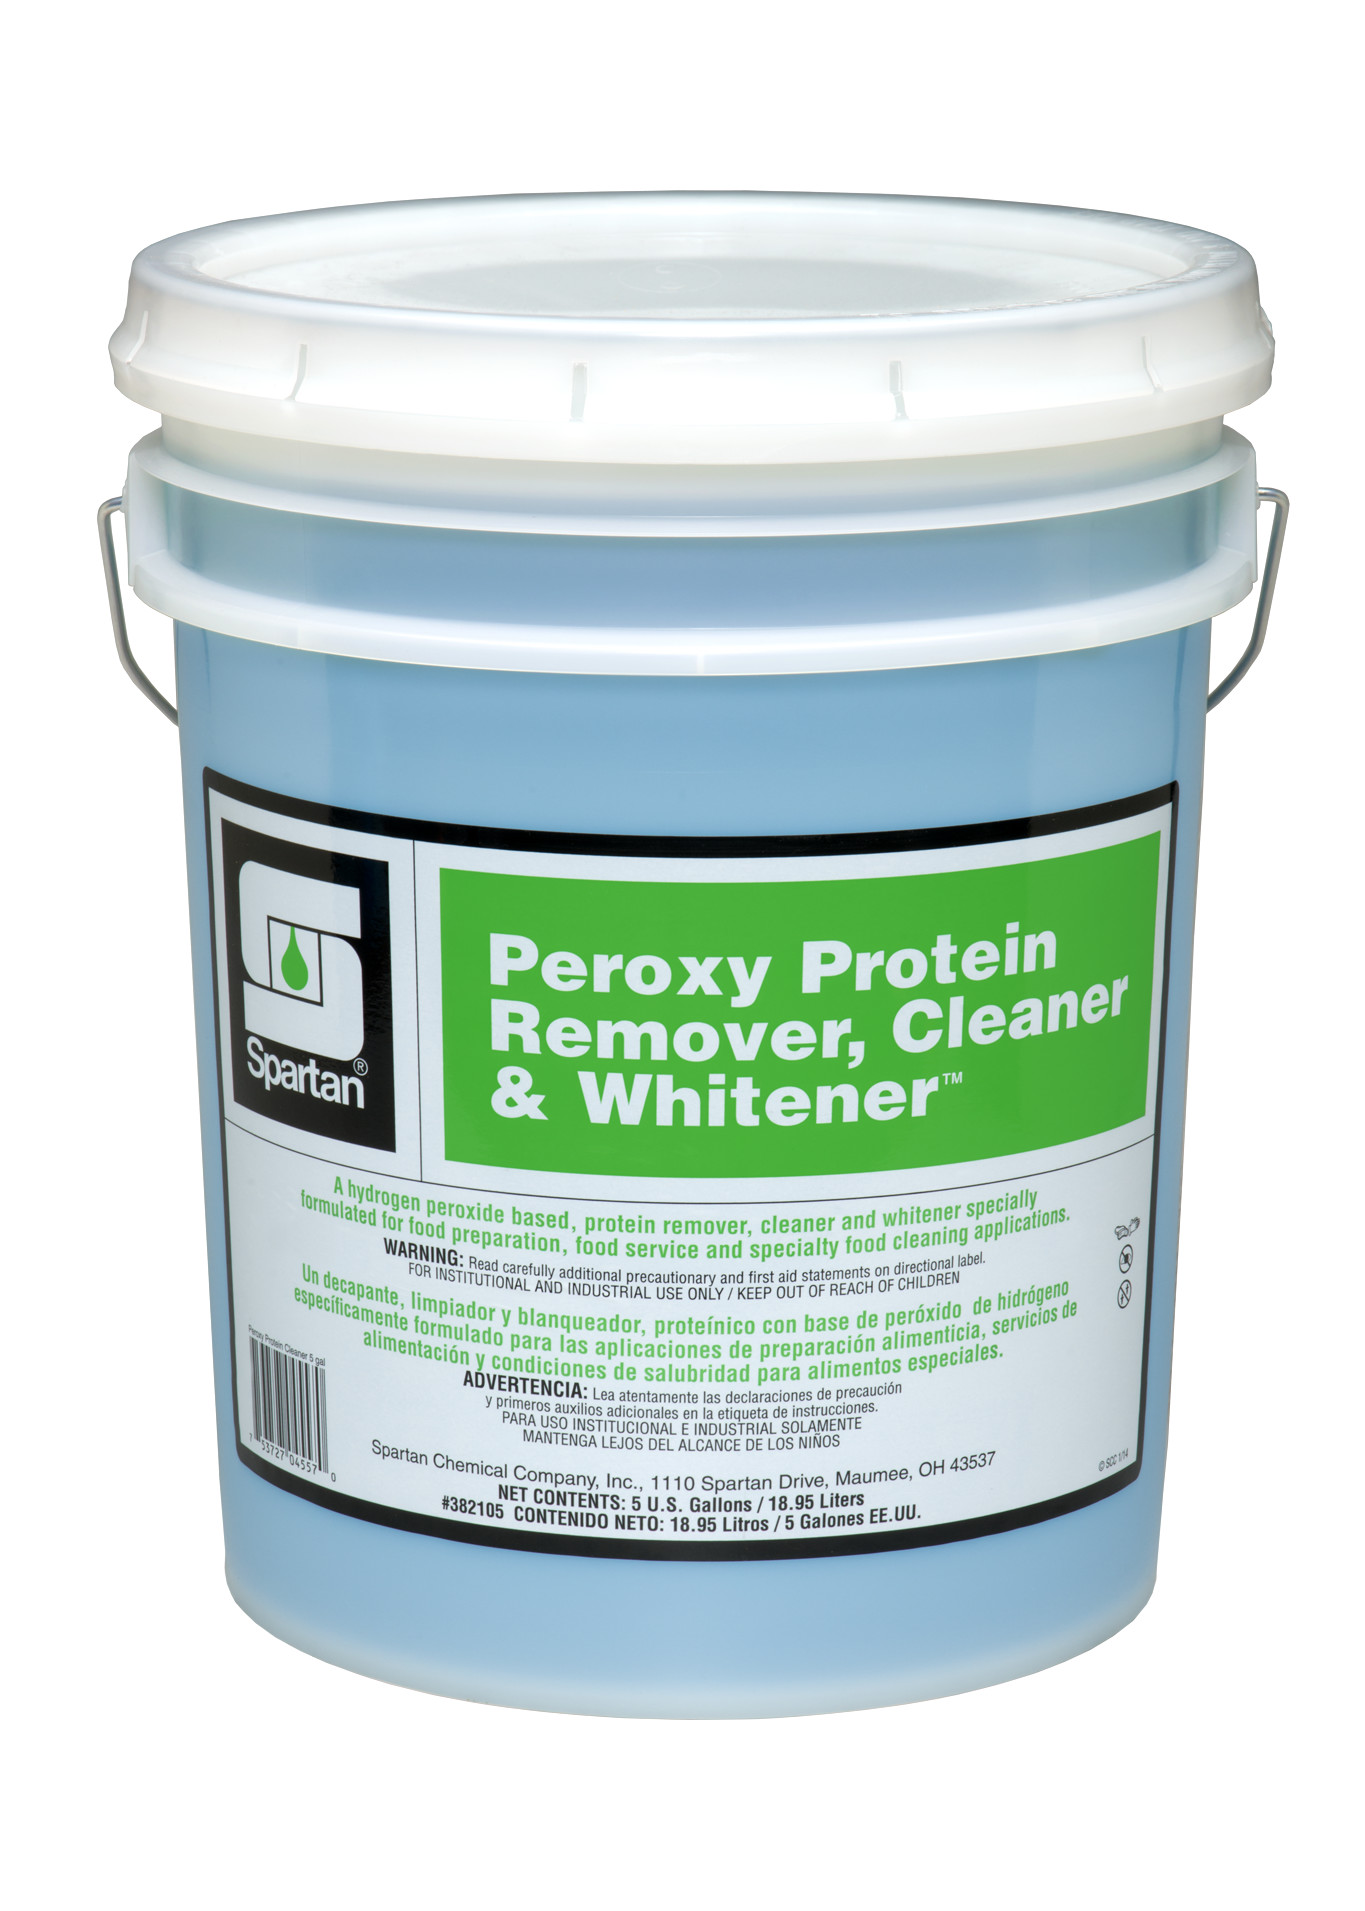 Peroxy+Protein+Remover%2C+Cleaner+%26+Whitener+%7B5+gallon+pail%7D